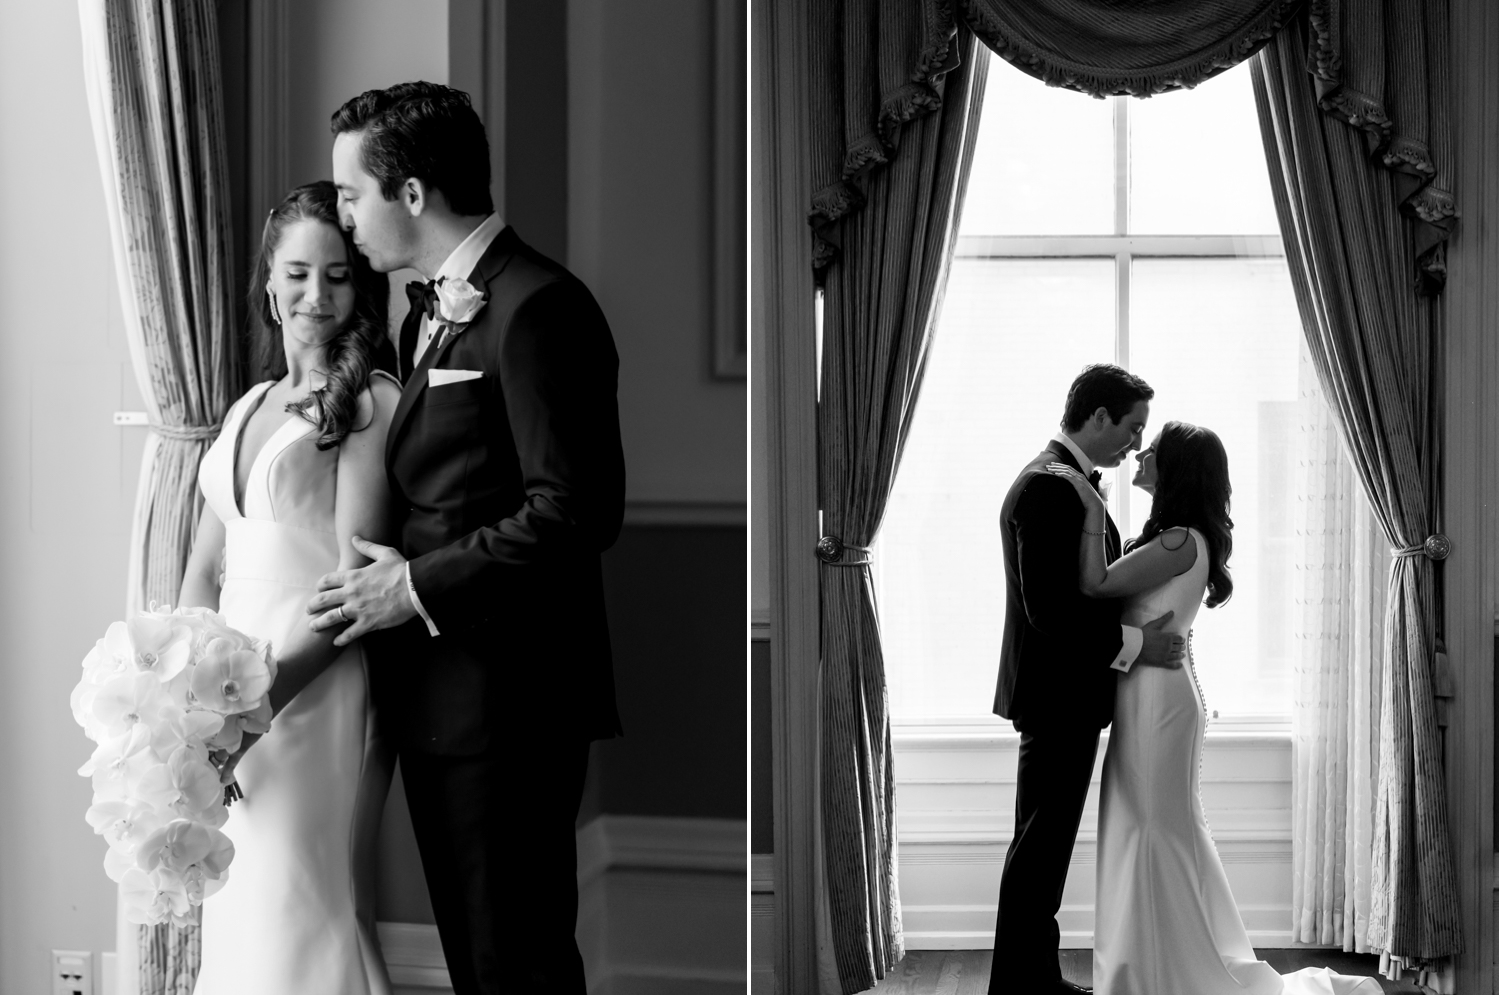 Left: a portrait where the groom holds the bride from behind and kisses her forehead. Right: The bride and groom hold each other and smile, framed by the ornate drapery and window they stand in front of.